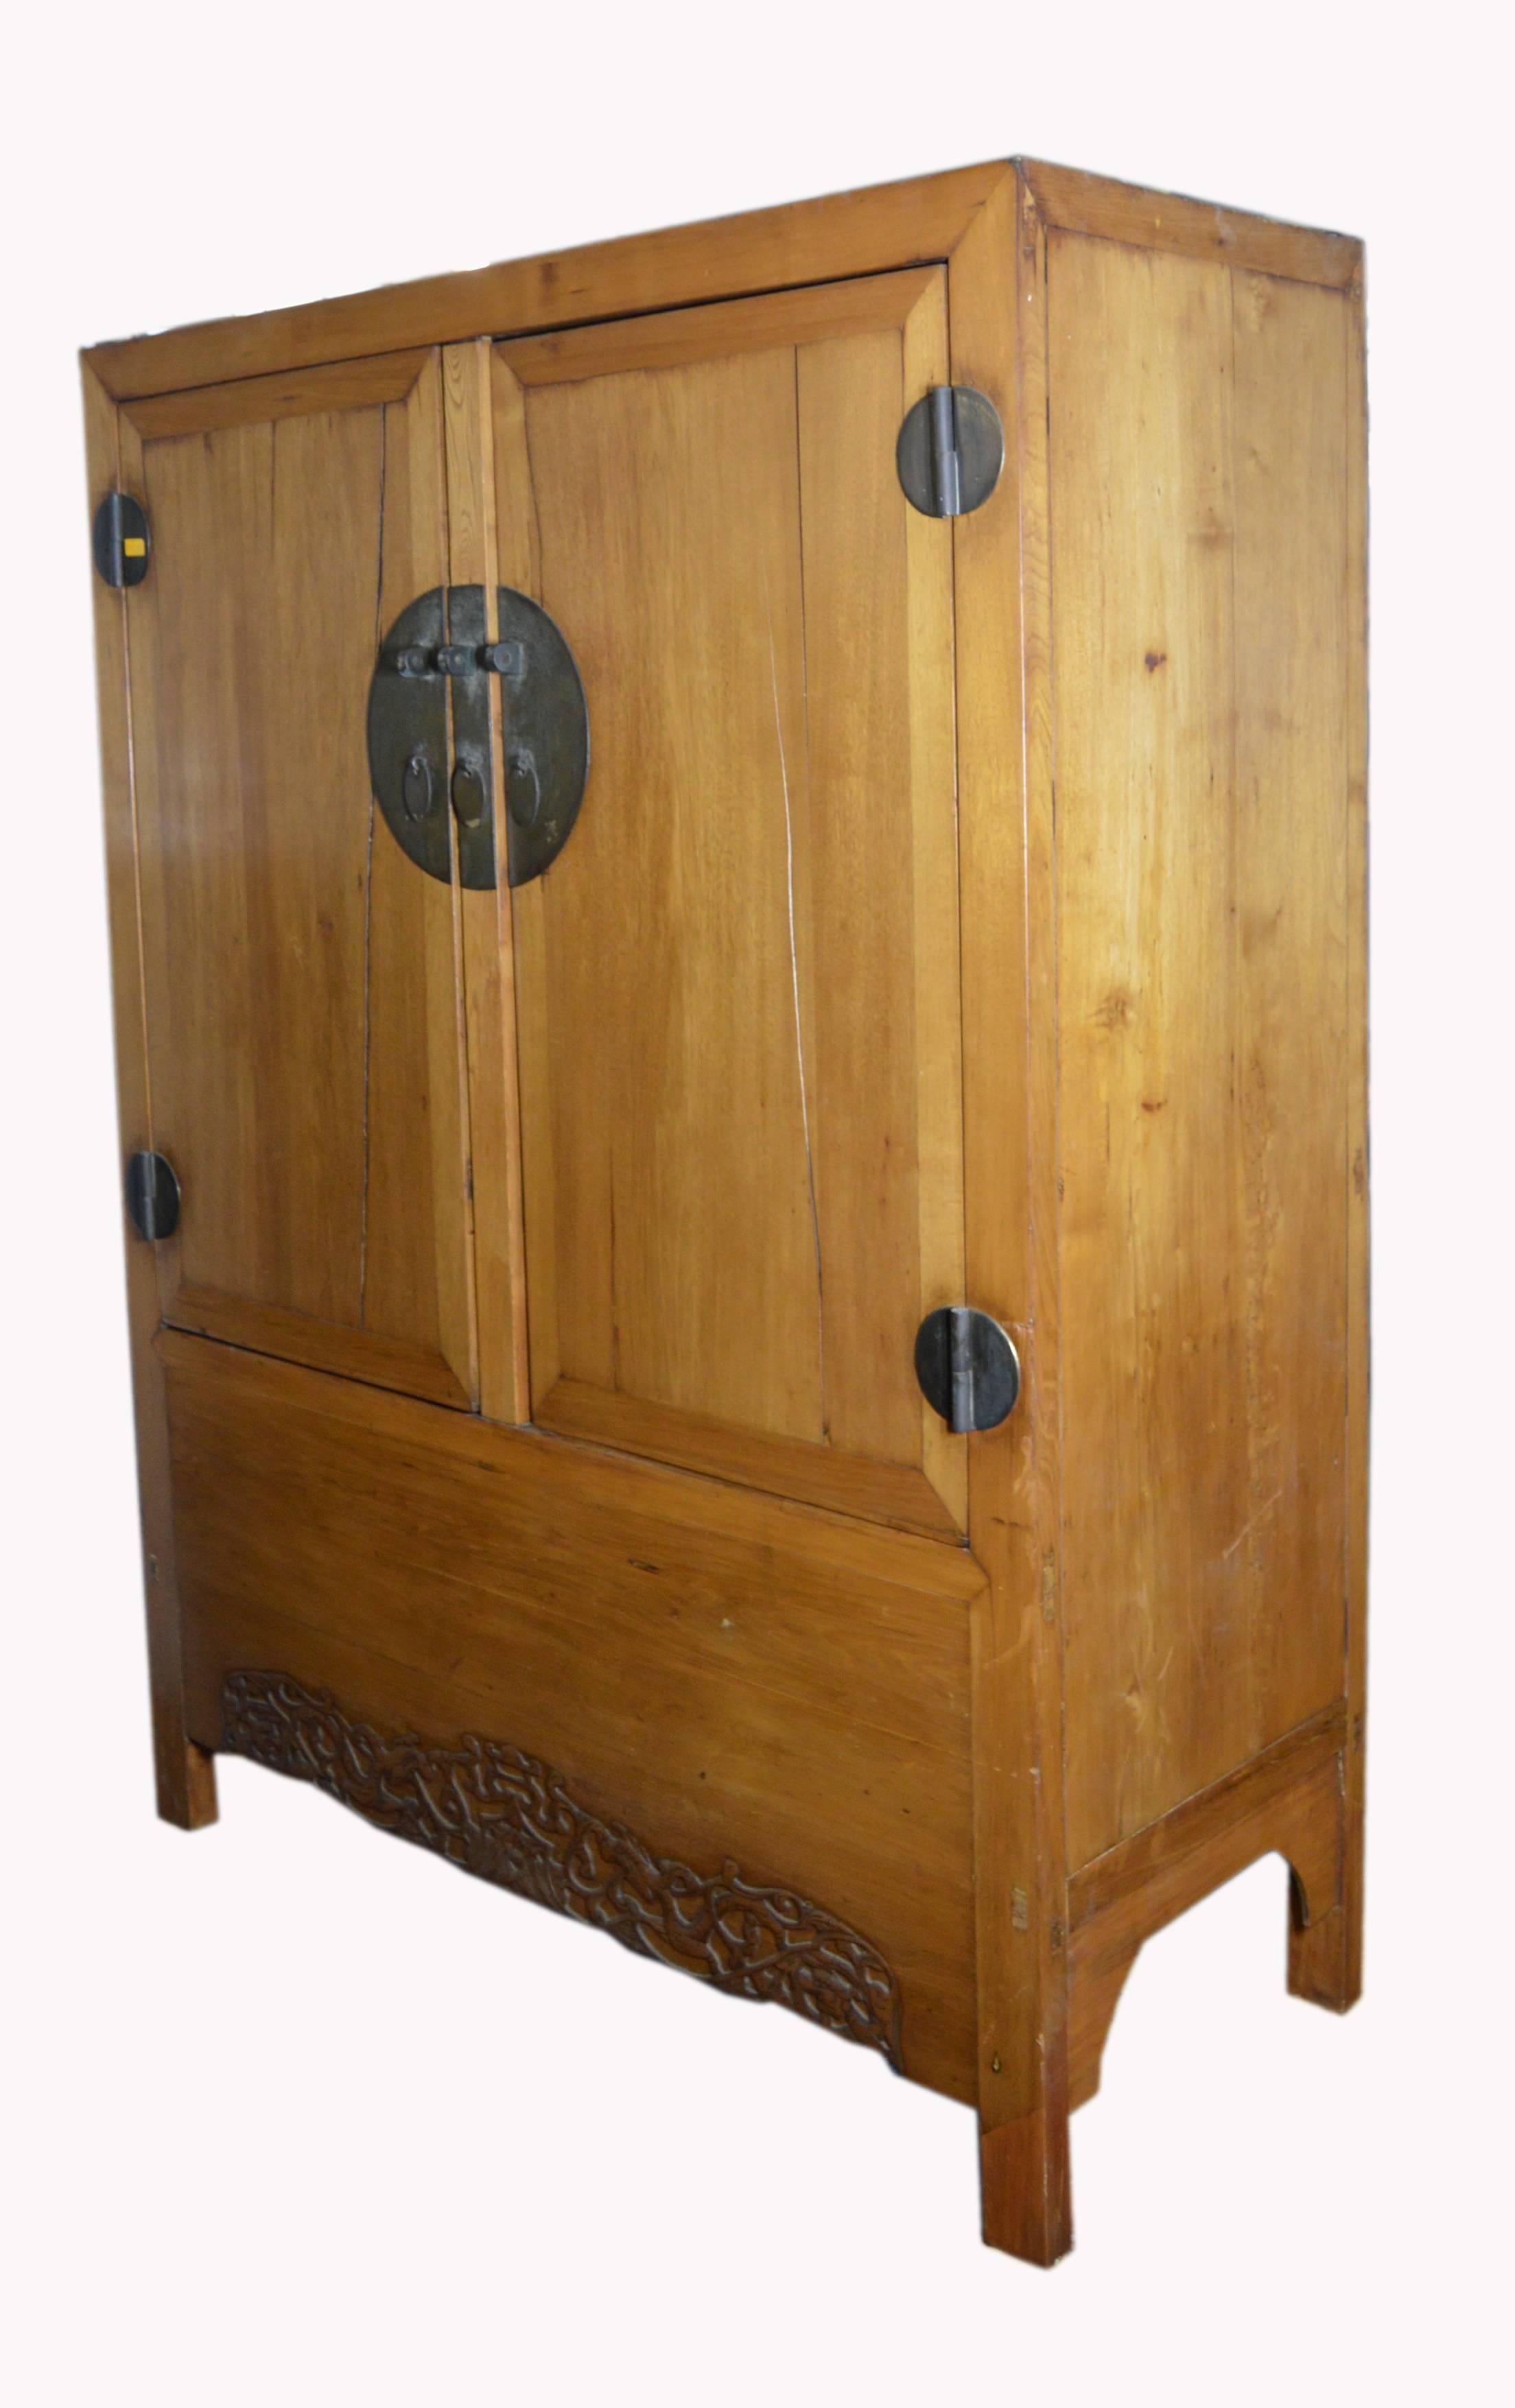 Antique Chinese Lacquered Cabinet with Doors, Drawers and Brass Hardware In Good Condition For Sale In Yonkers, NY